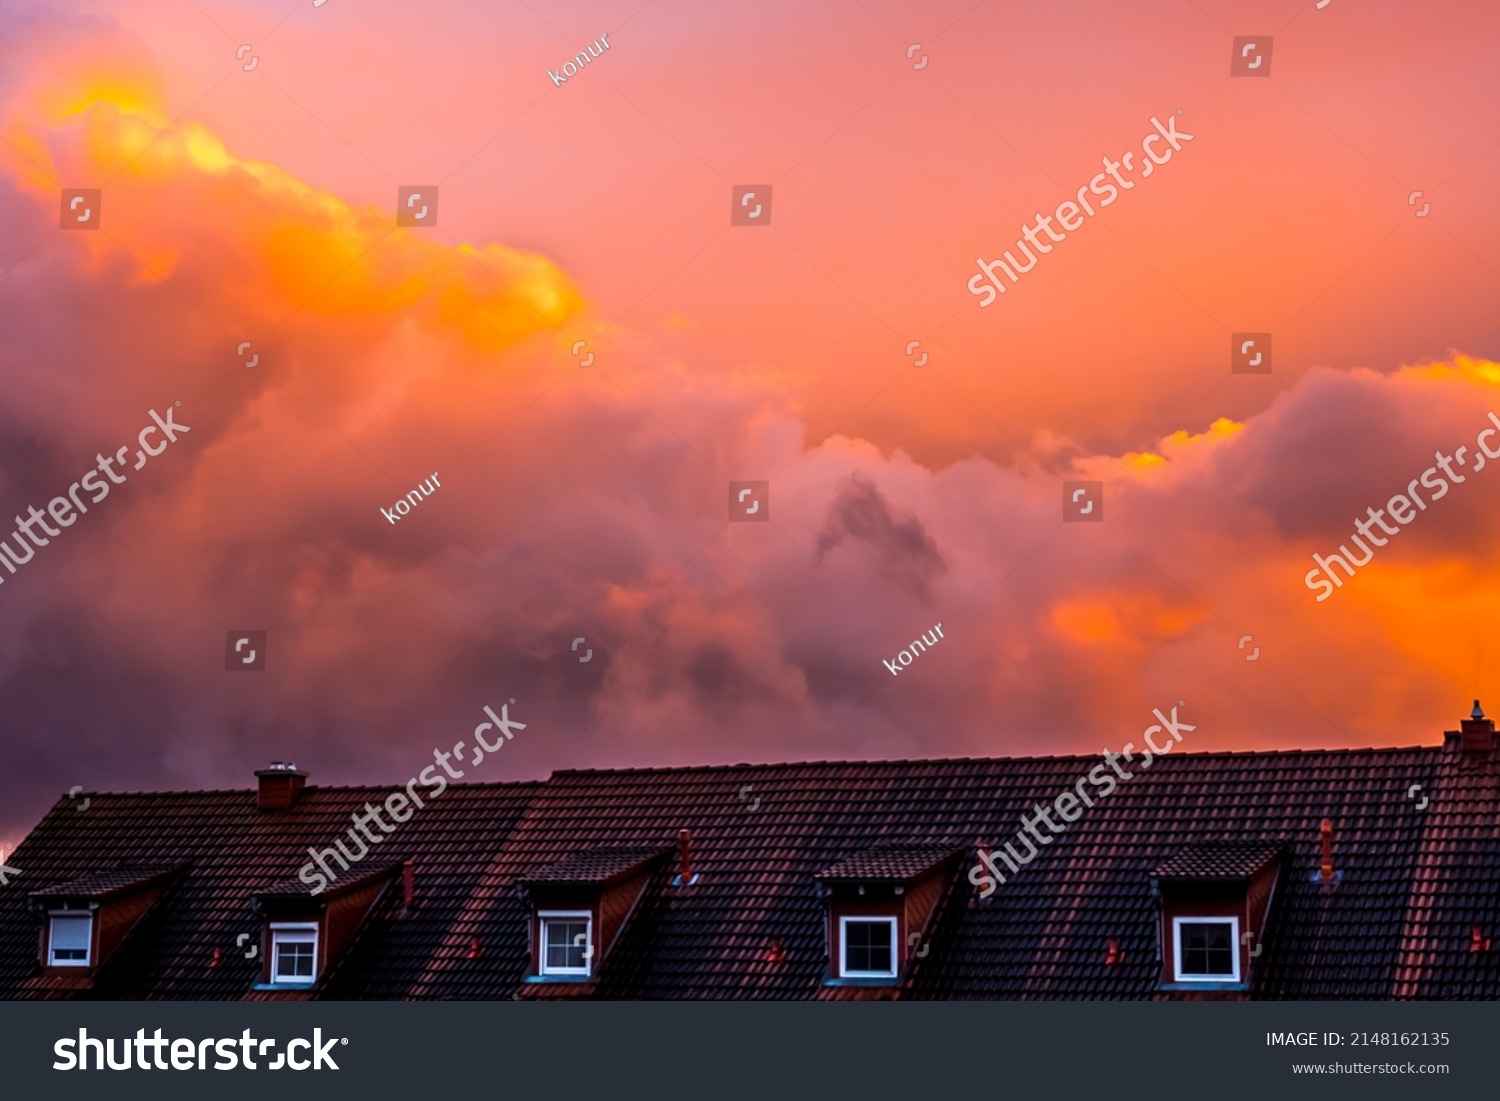 Over Roofs Images Stock Photos Vectors Shutterstock